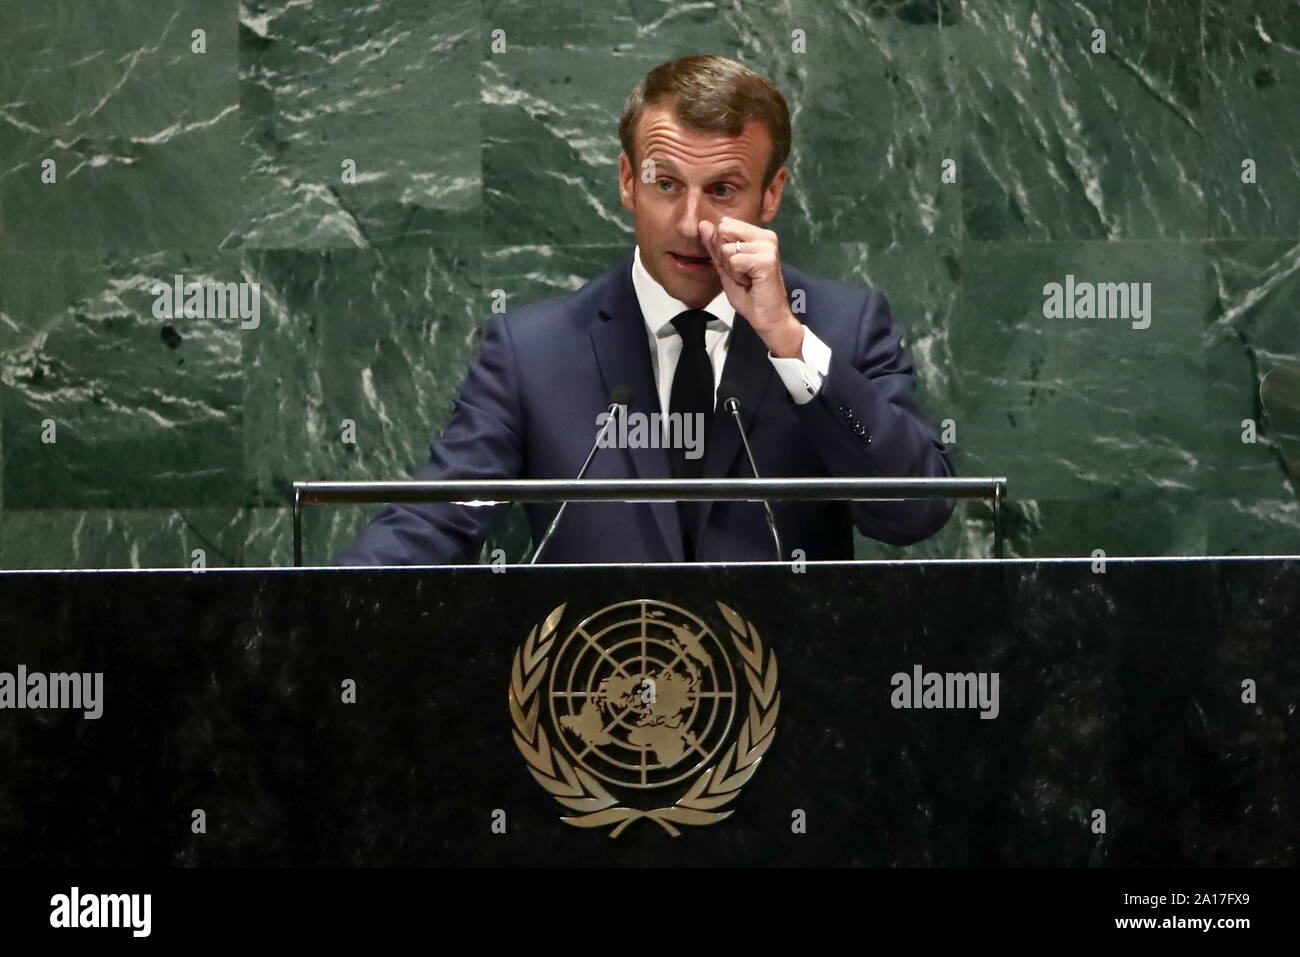 New York City, USA. 24th Sep, 2019. NEW YORK CITY, USA - SEPTEMBER 24, 2019: France's President Emmanuel Macron speaks at a ceremony to open the 74th session of the UN General Assembly at the headquarters of the United Nations in Manhattan. Valery Sharifulin/TASS Credit: ITAR-TASS News Agency/Alamy Live News Stock Photo